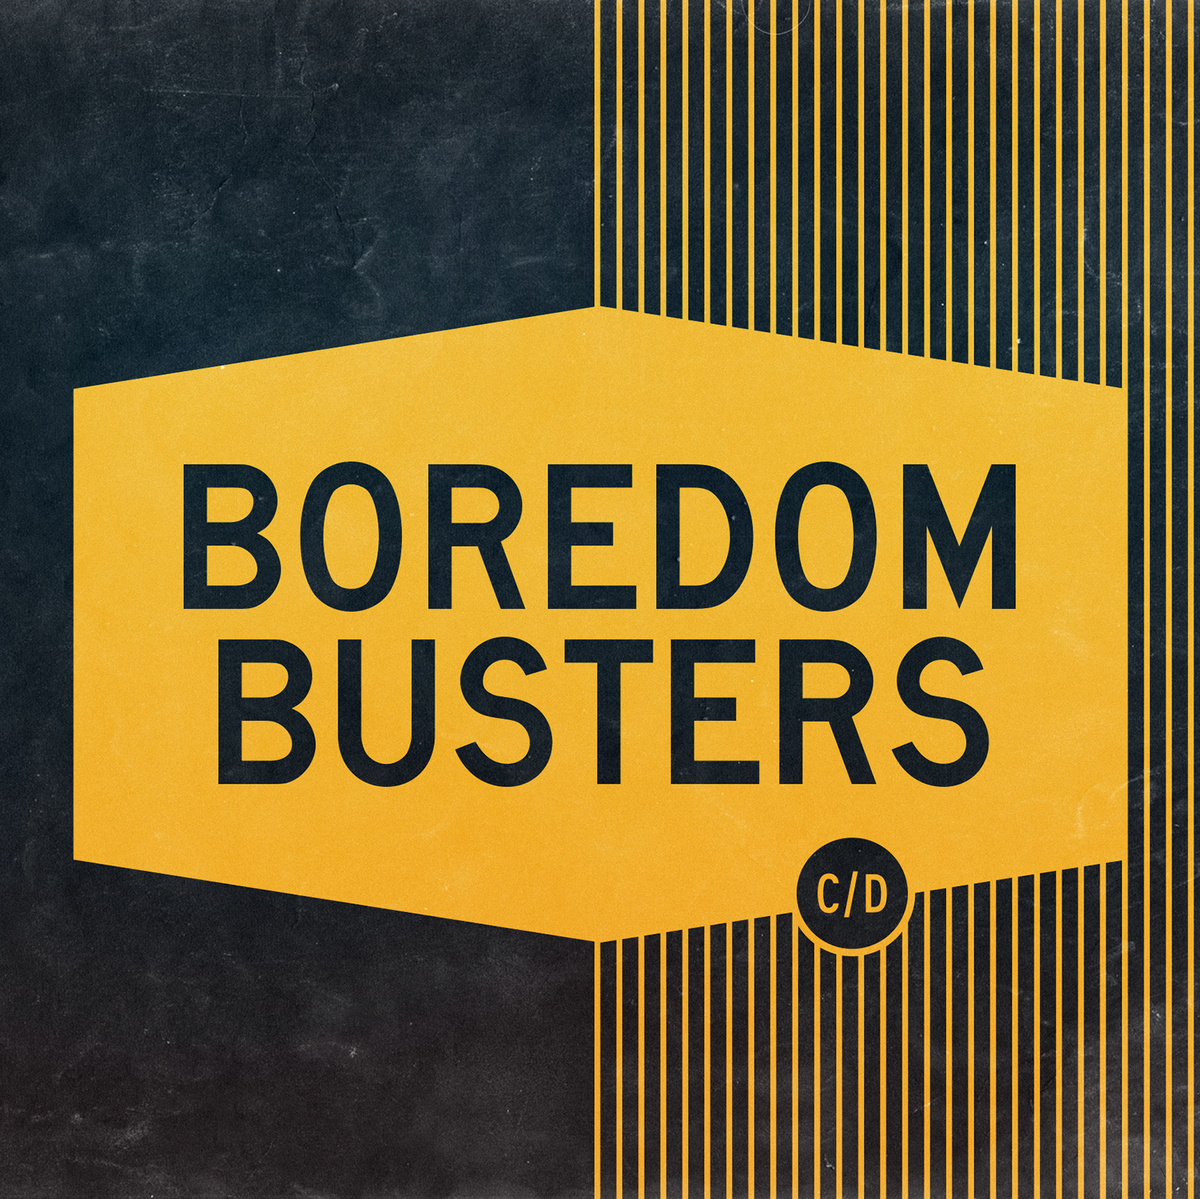 Indoor Boredom Busters for Your Dog - News